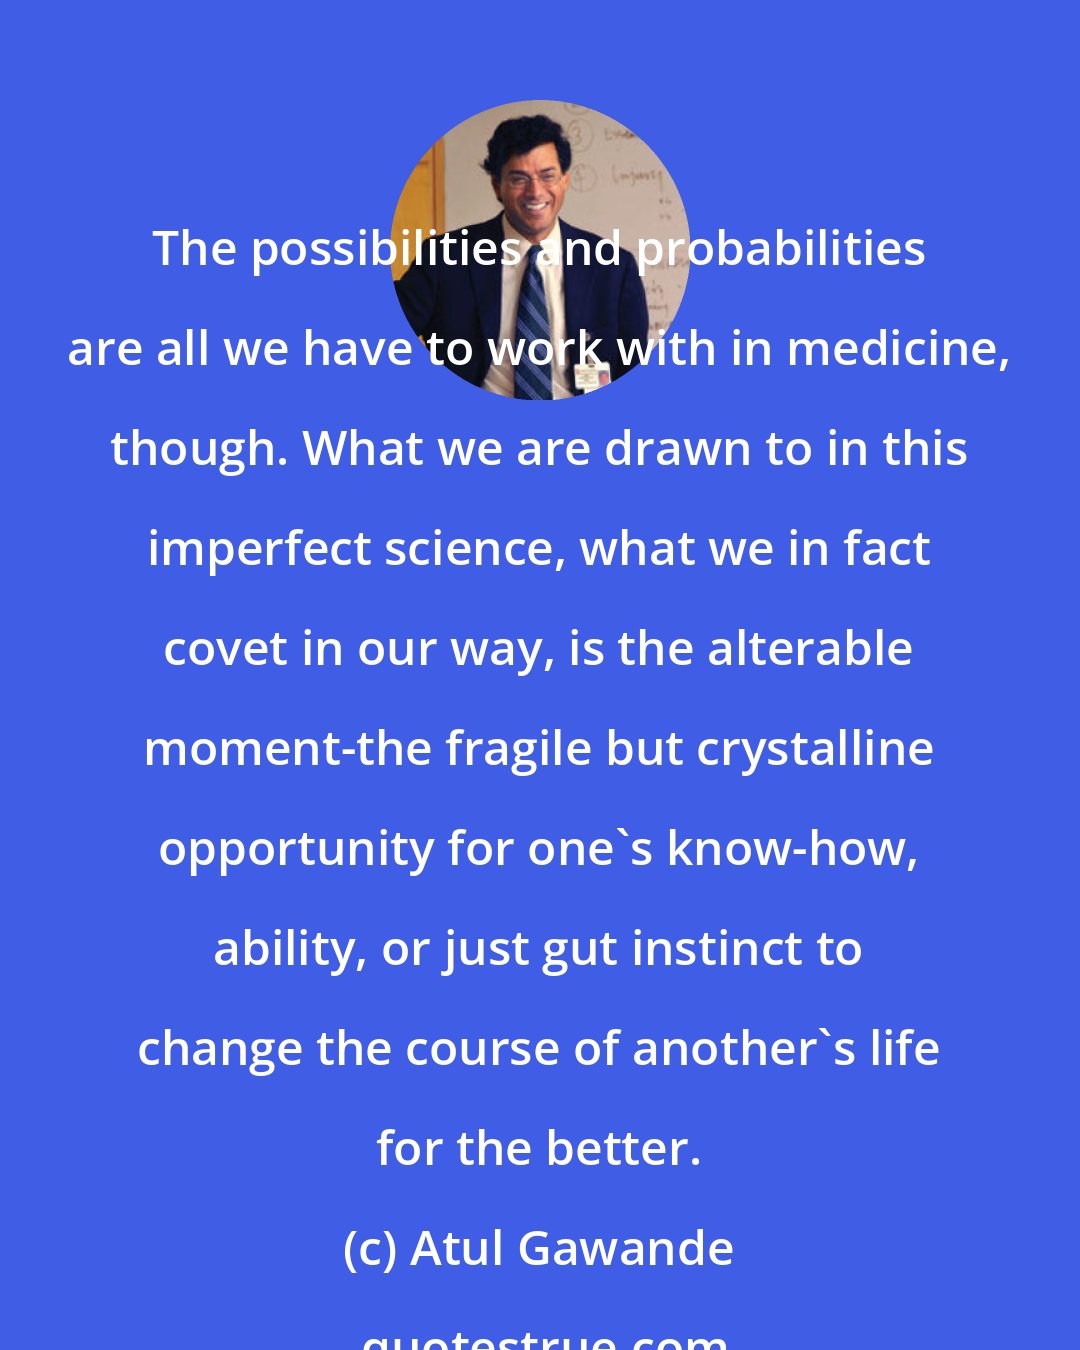 Atul Gawande: The possibilities and probabilities are all we have to work with in medicine, though. What we are drawn to in this imperfect science, what we in fact covet in our way, is the alterable moment-the fragile but crystalline opportunity for one's know-how, ability, or just gut instinct to change the course of another's life for the better.